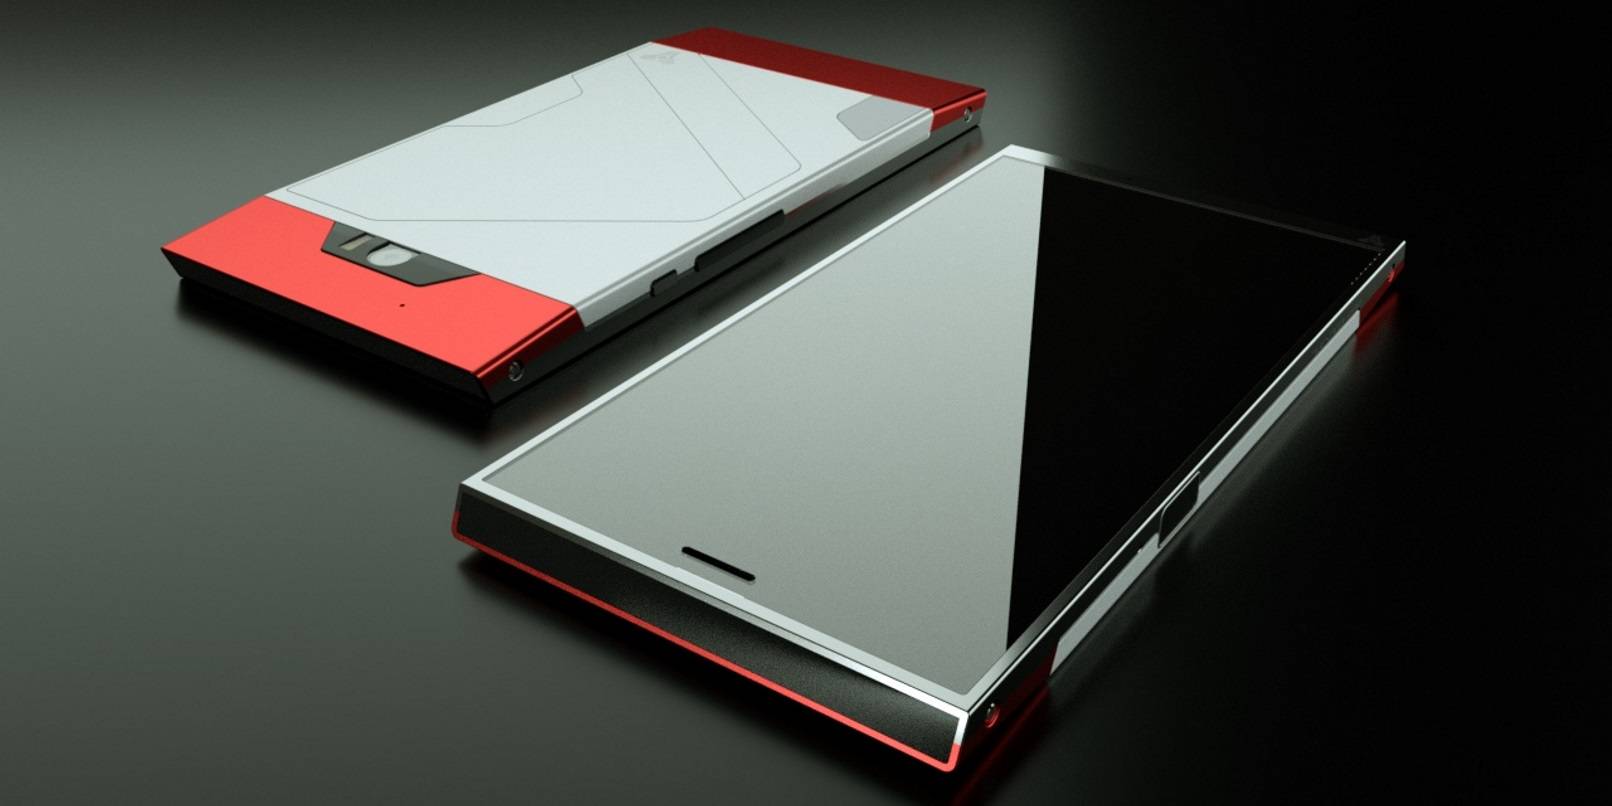 makers-of-ultra-secure-turing-phone-file-for-bankruptcy